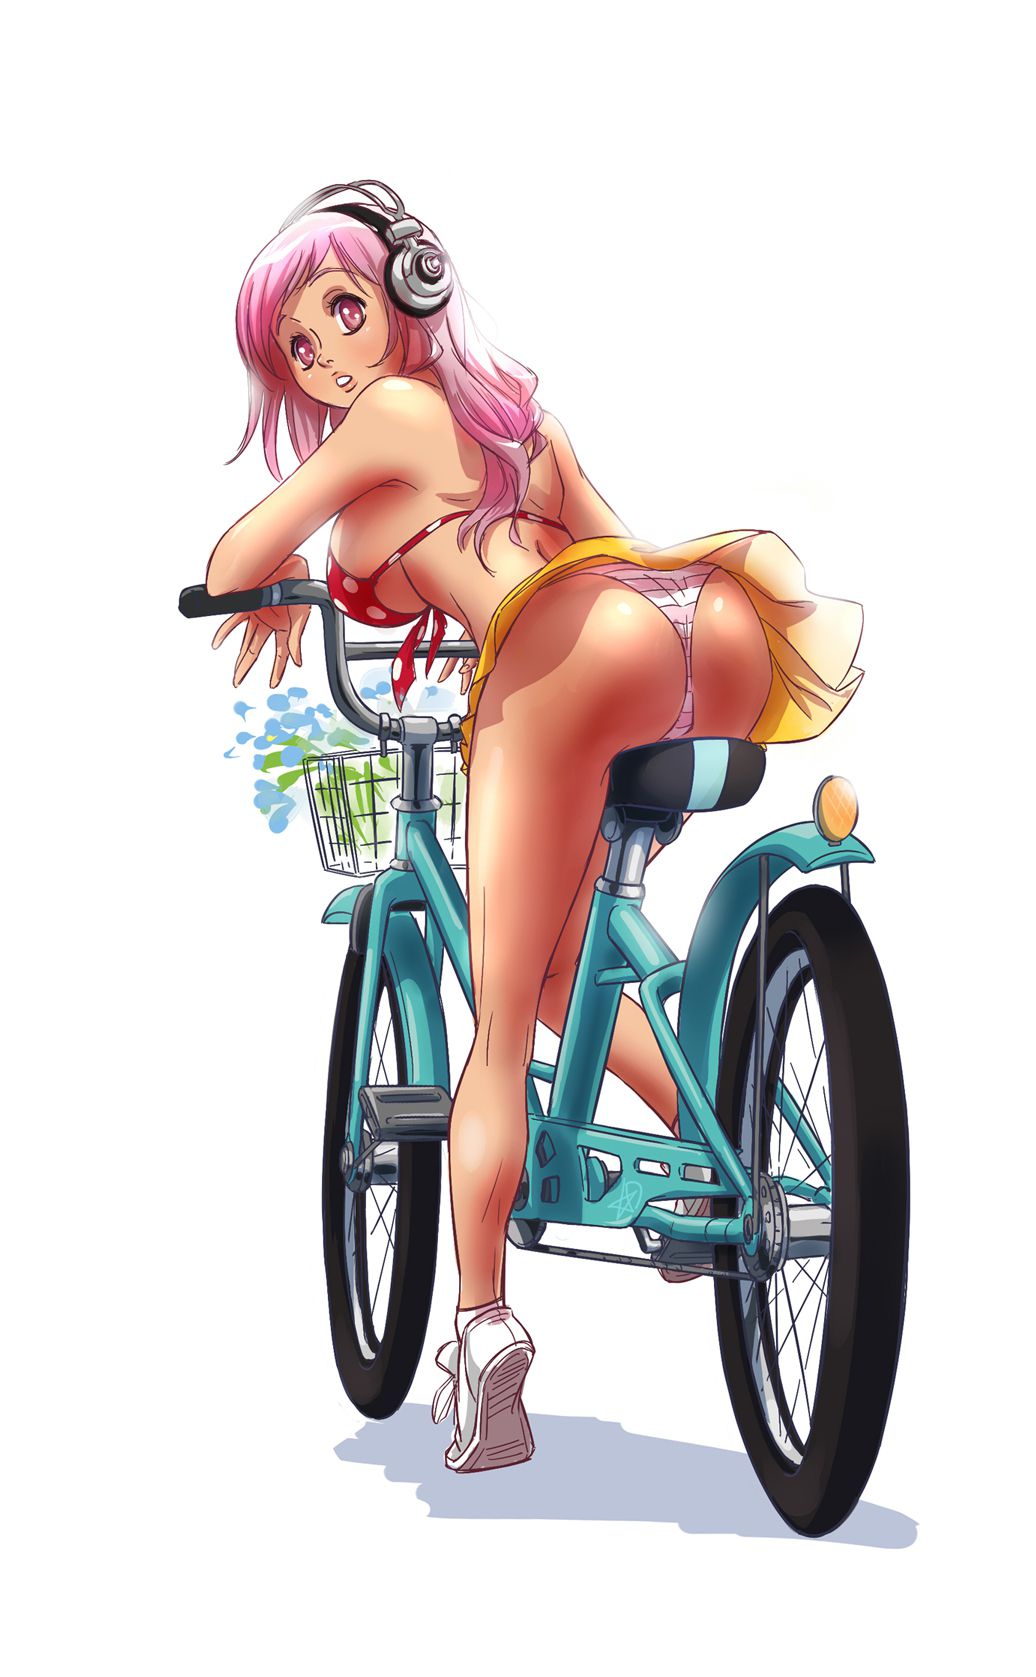 【Secondary】Erotic image of "bicycle panchira" where a country schoolgirl serves a salaryman on her way to work every morning 33